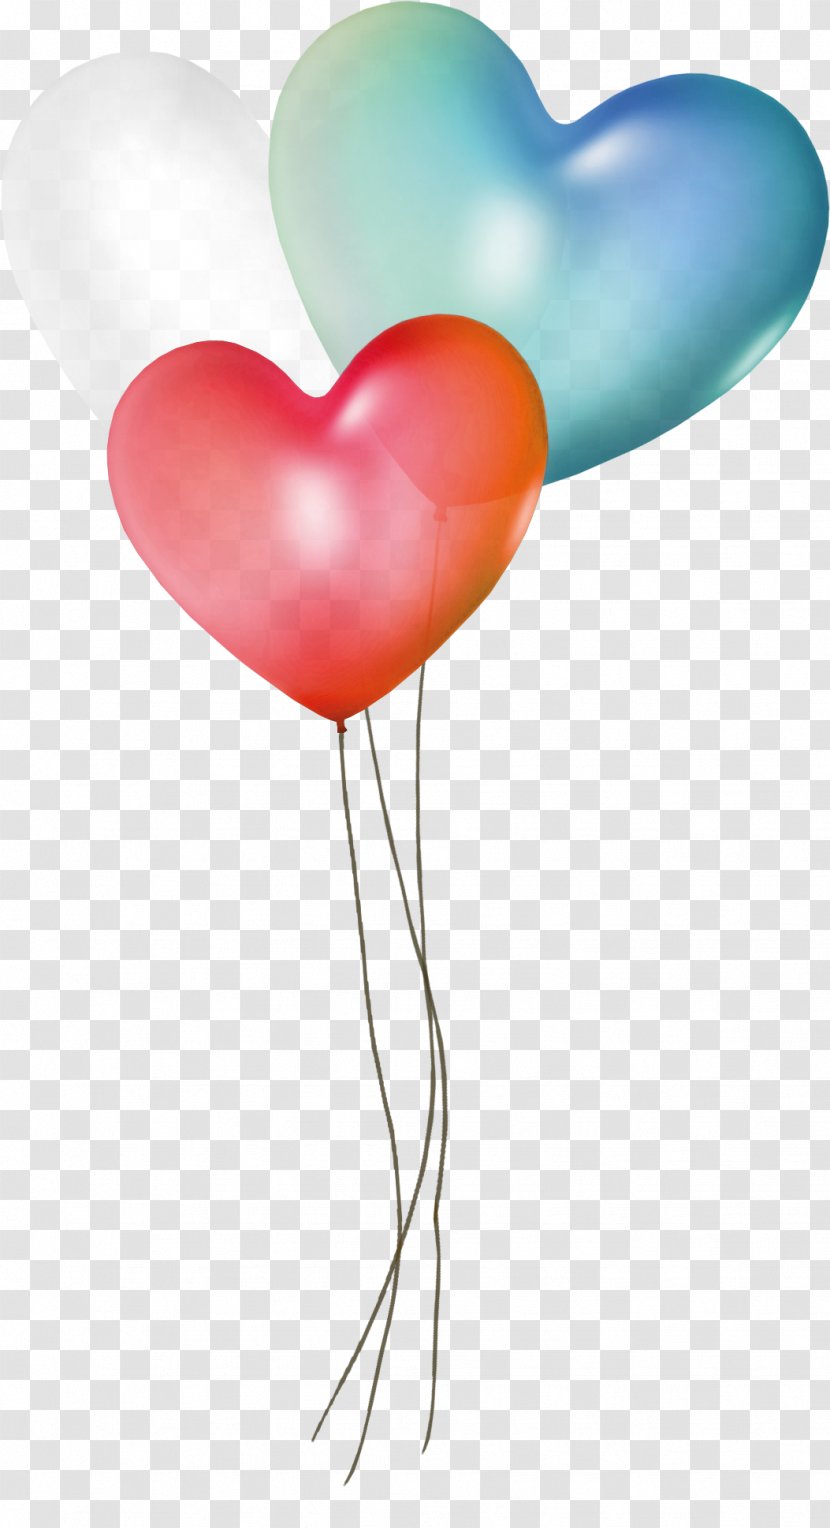 Balloon Love - Gold Transparent PNG